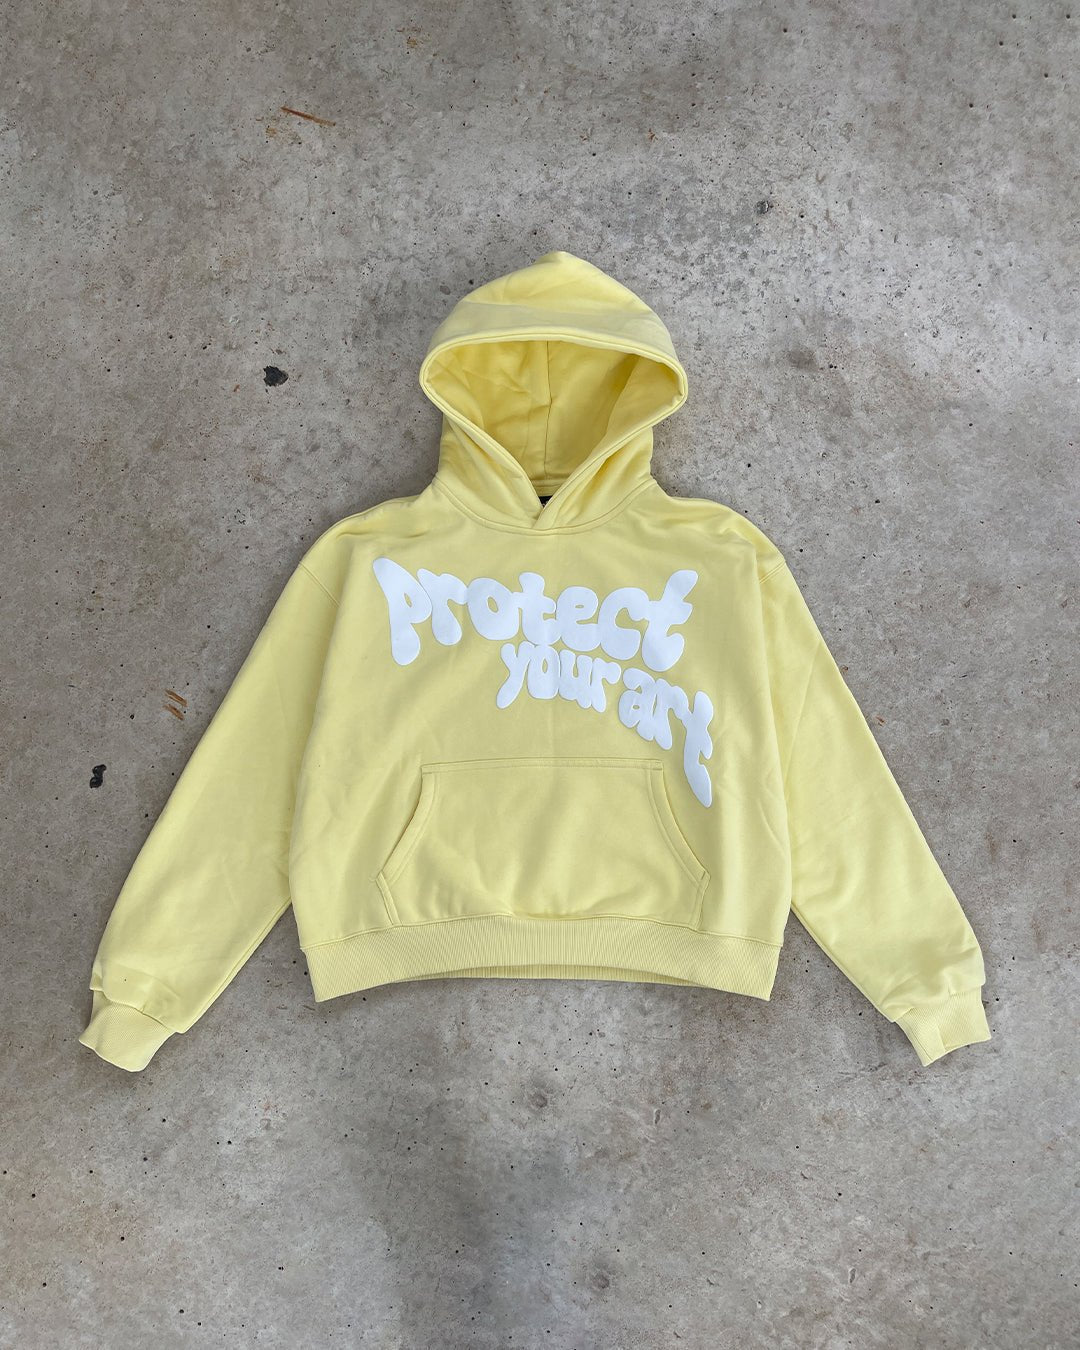 protect your art hoodie yellow - Statement